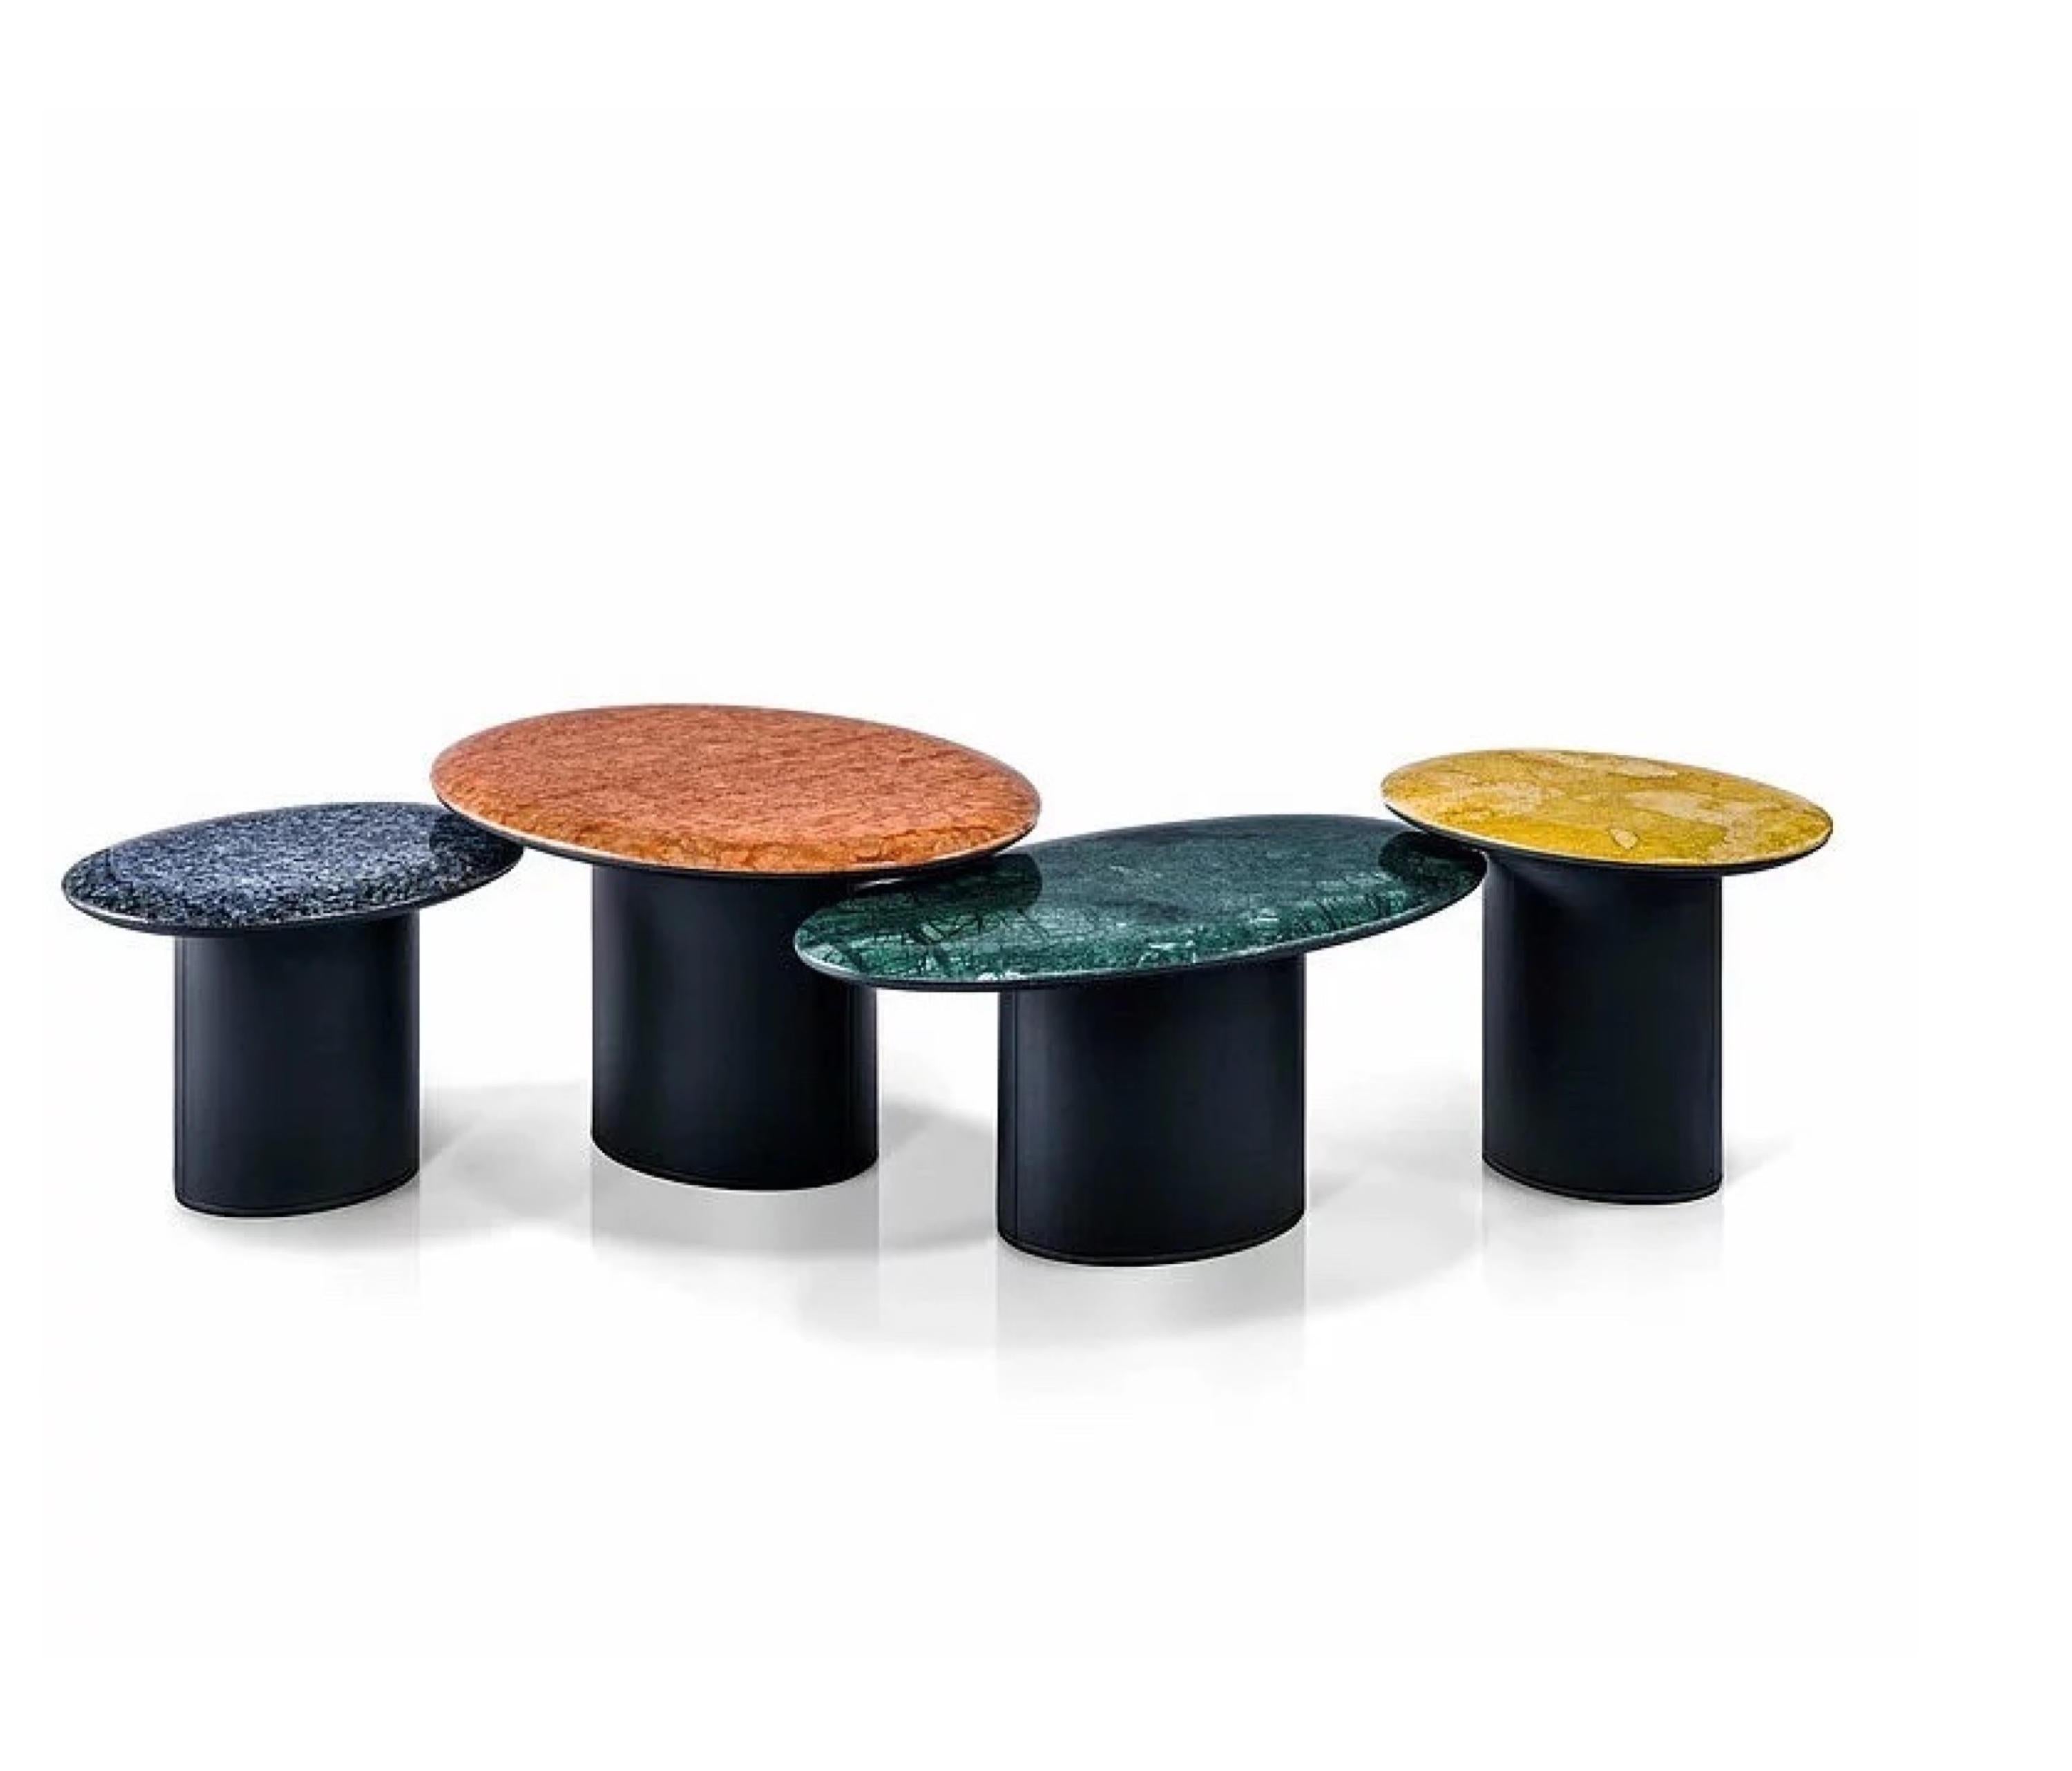 At the time of the Wiener Werkstätte around the 1900s, Josef Hoffmann designed extravagant brooches made in traditional craftsmanship. These colorful time- lessly beautiful jewelry inspired Luca Nichetto to create this extraordinary table